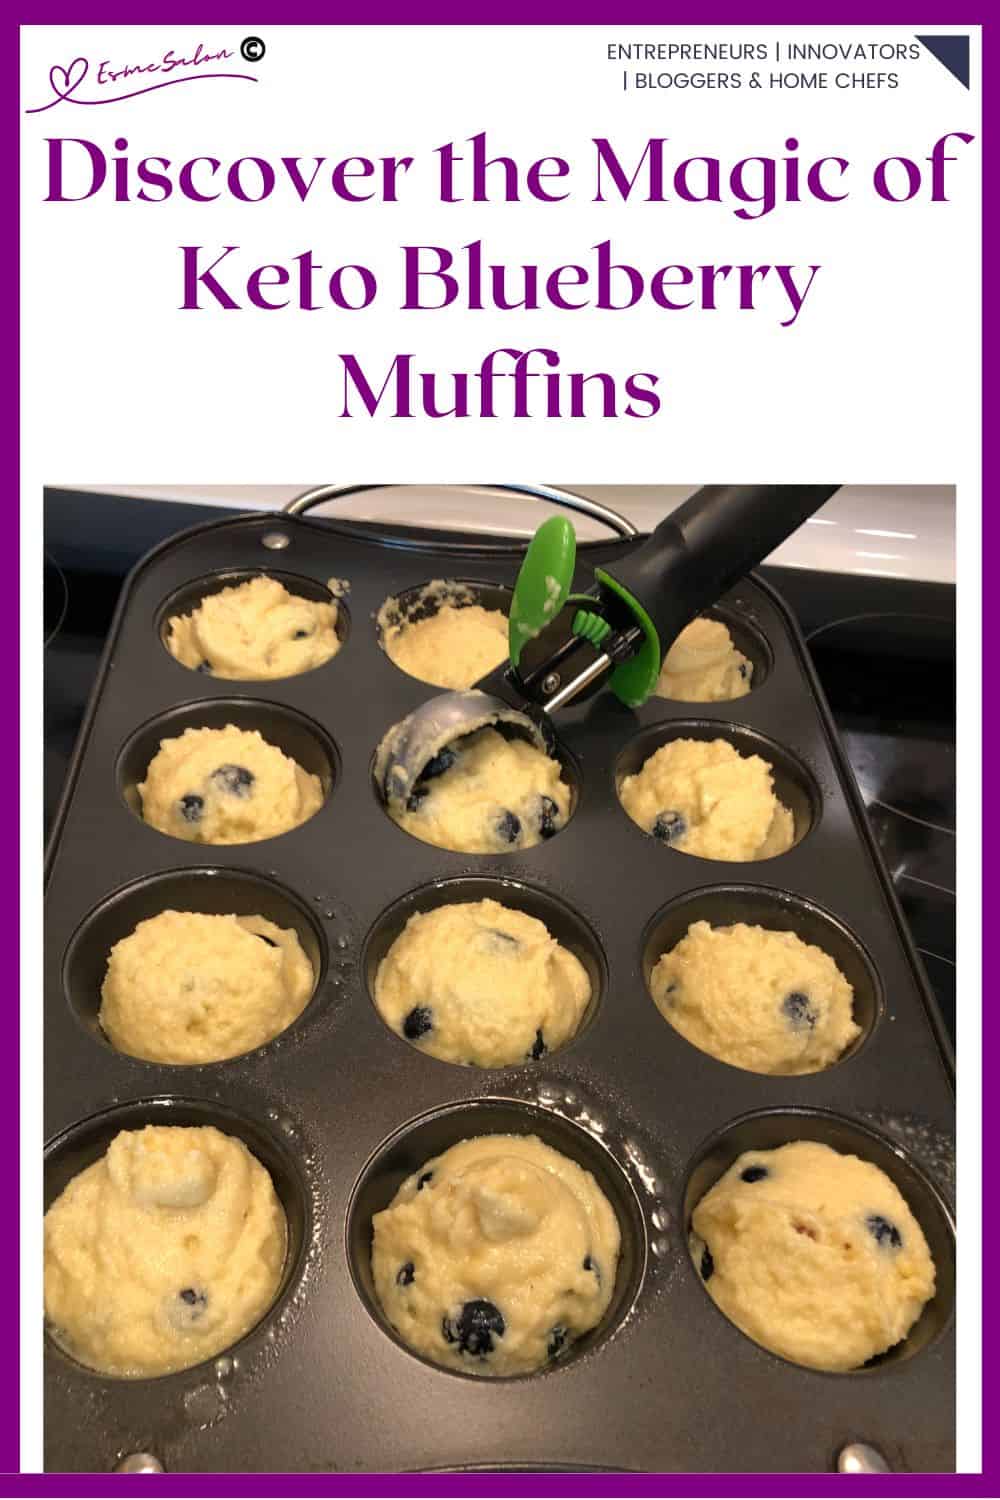 an image of Keto Blueberry Muffin batter to be baked